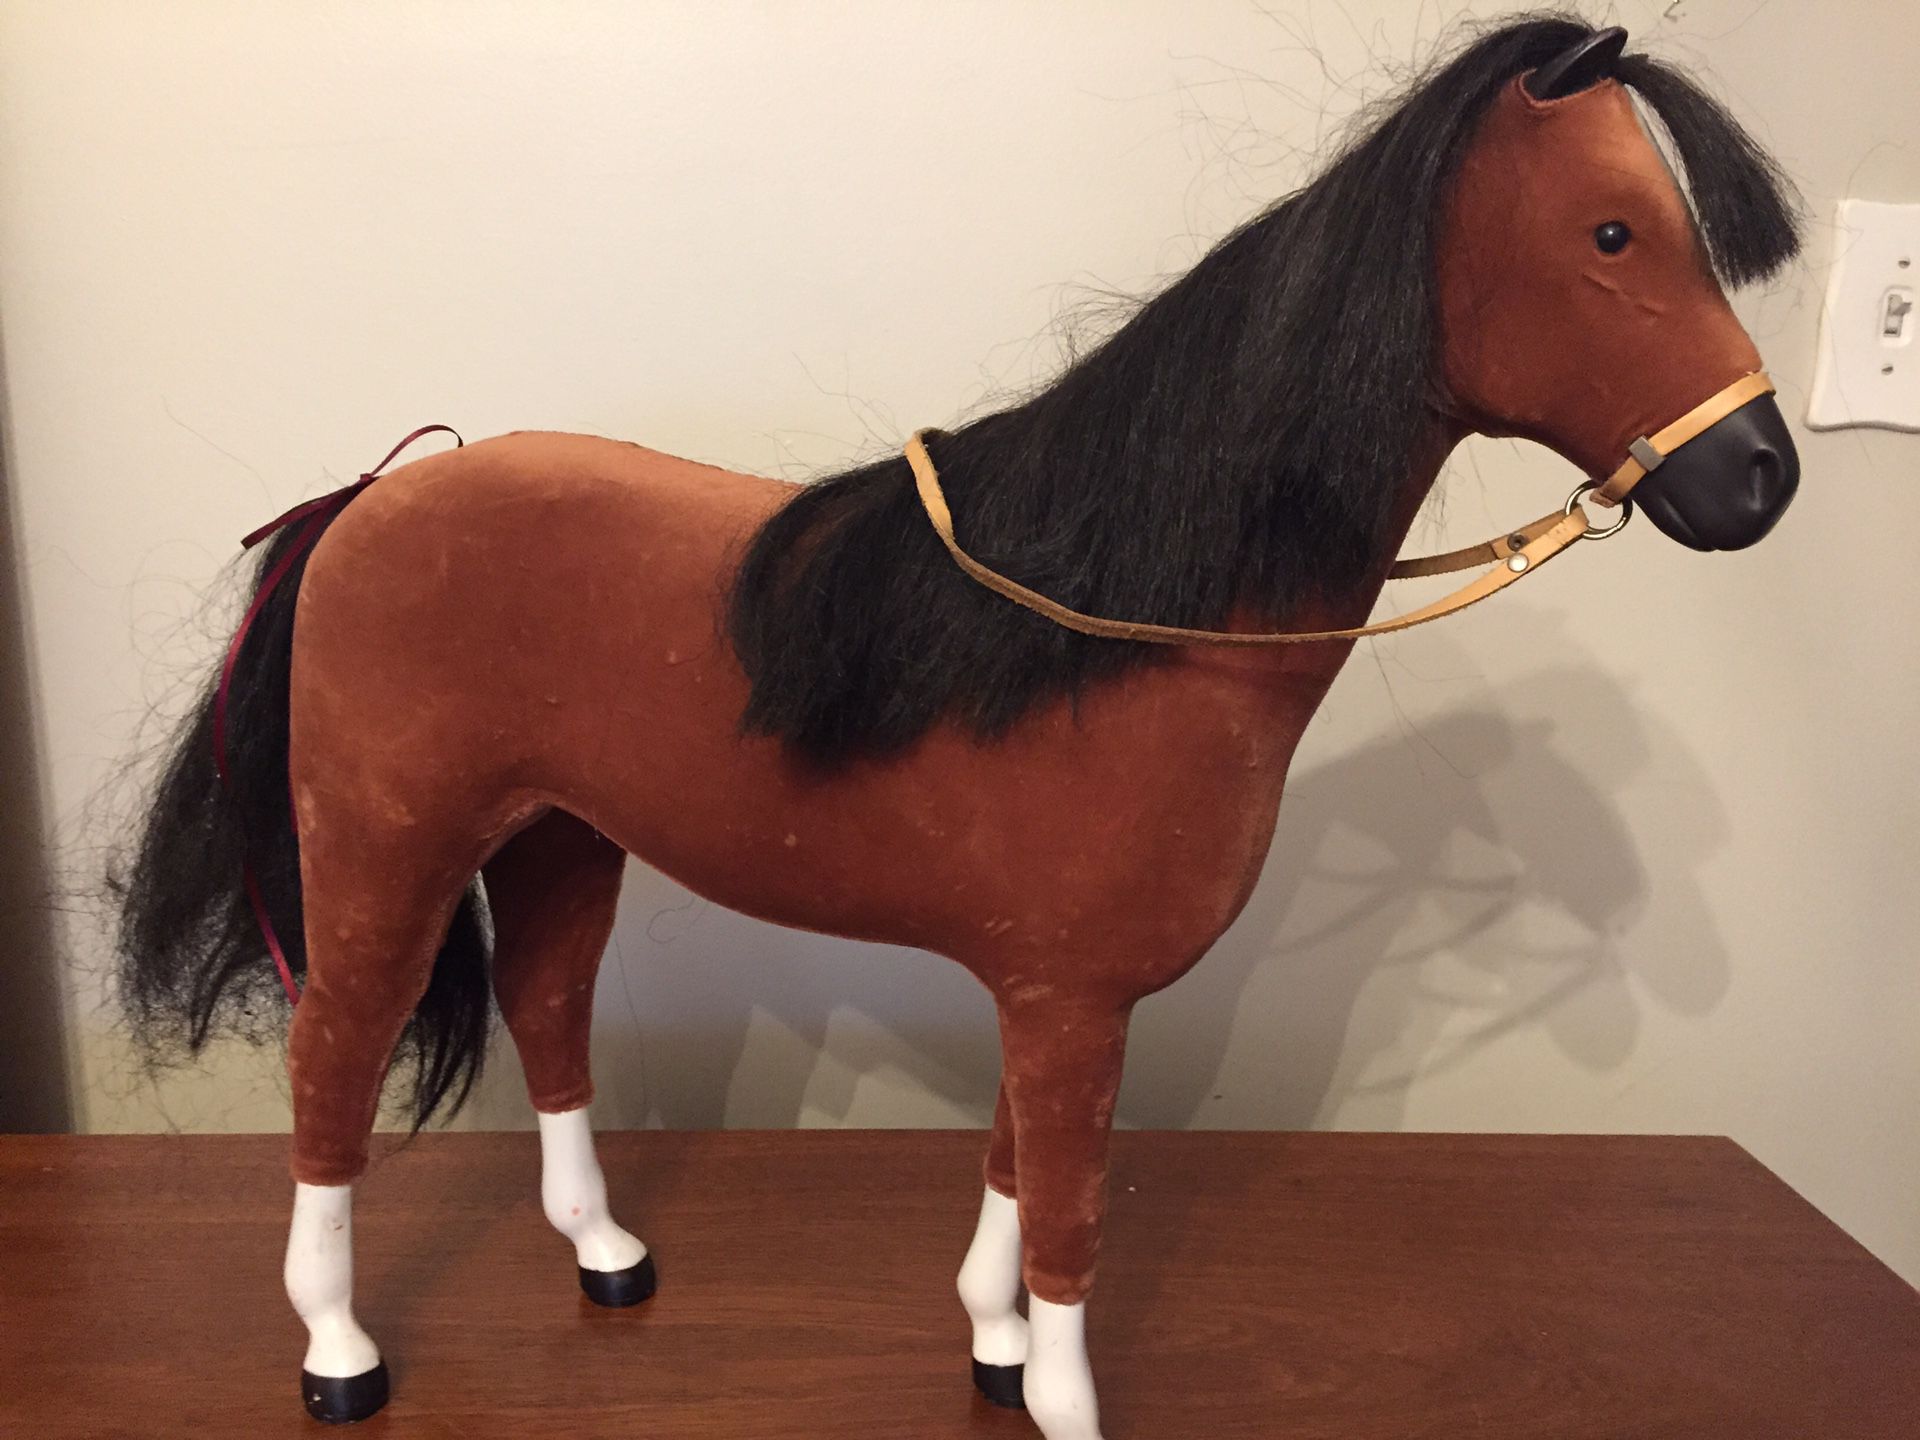 American Girl Doll Horse “Penny” Collectible